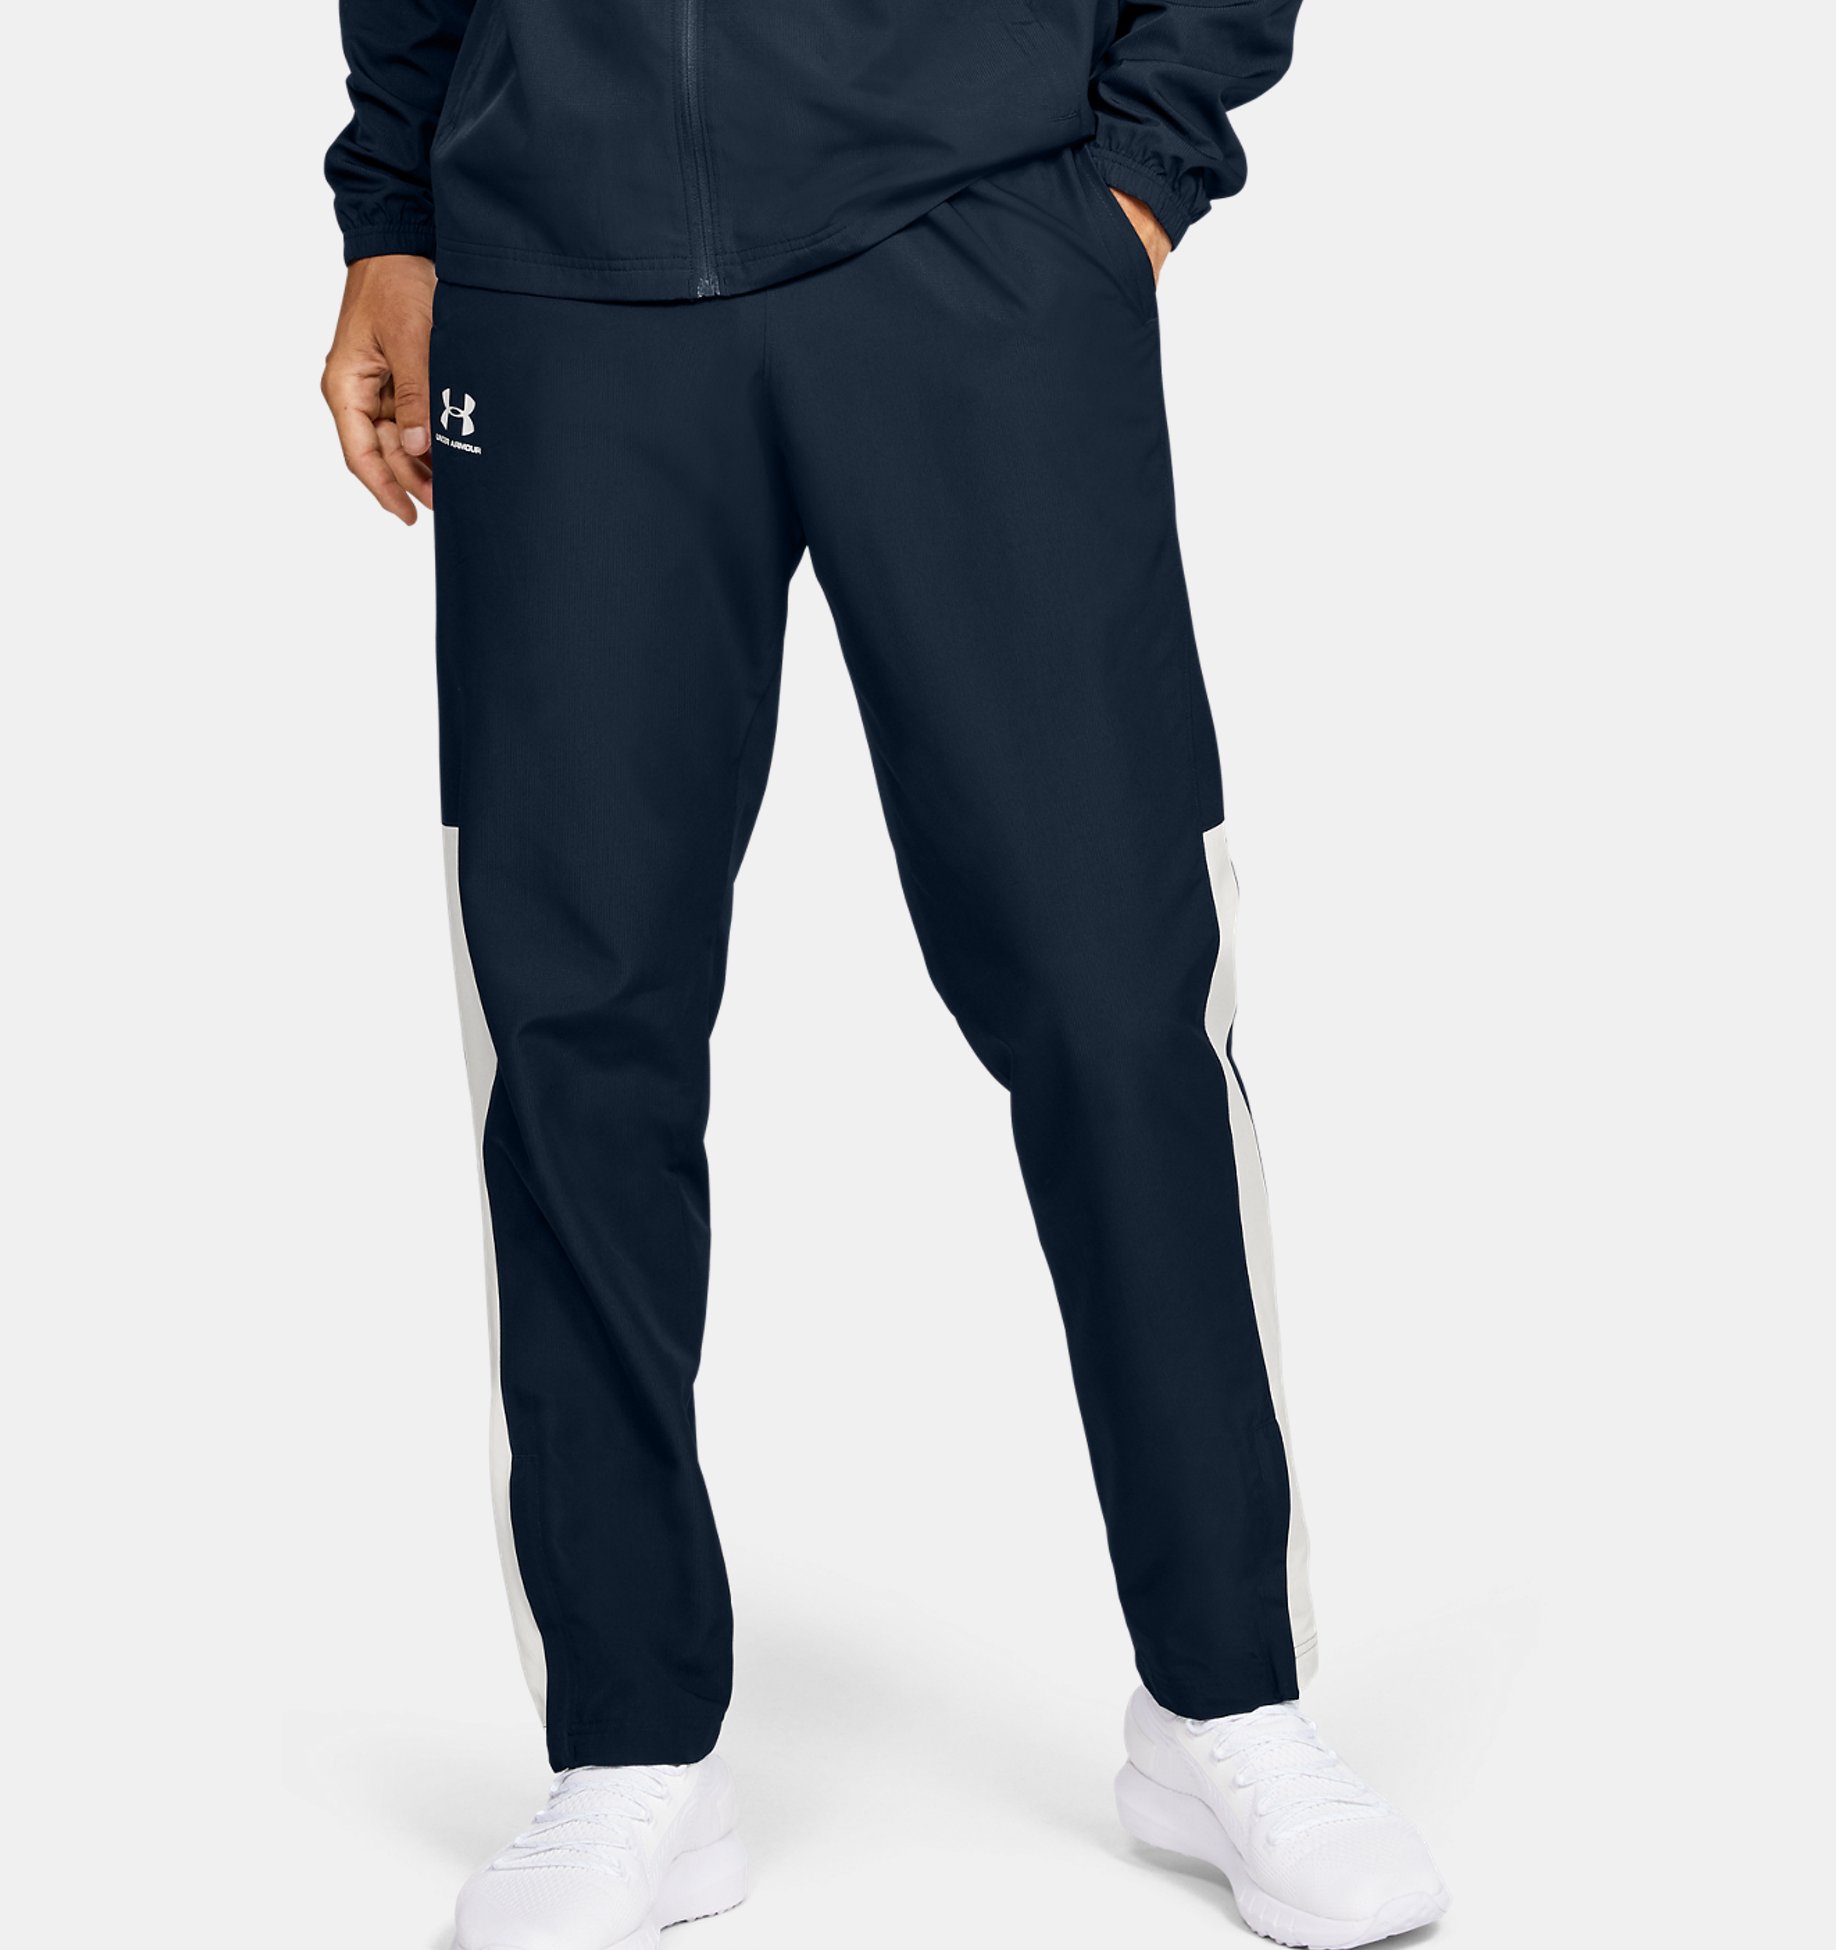 Under Armour Mens Sportstyle Woven Pant Trousers 